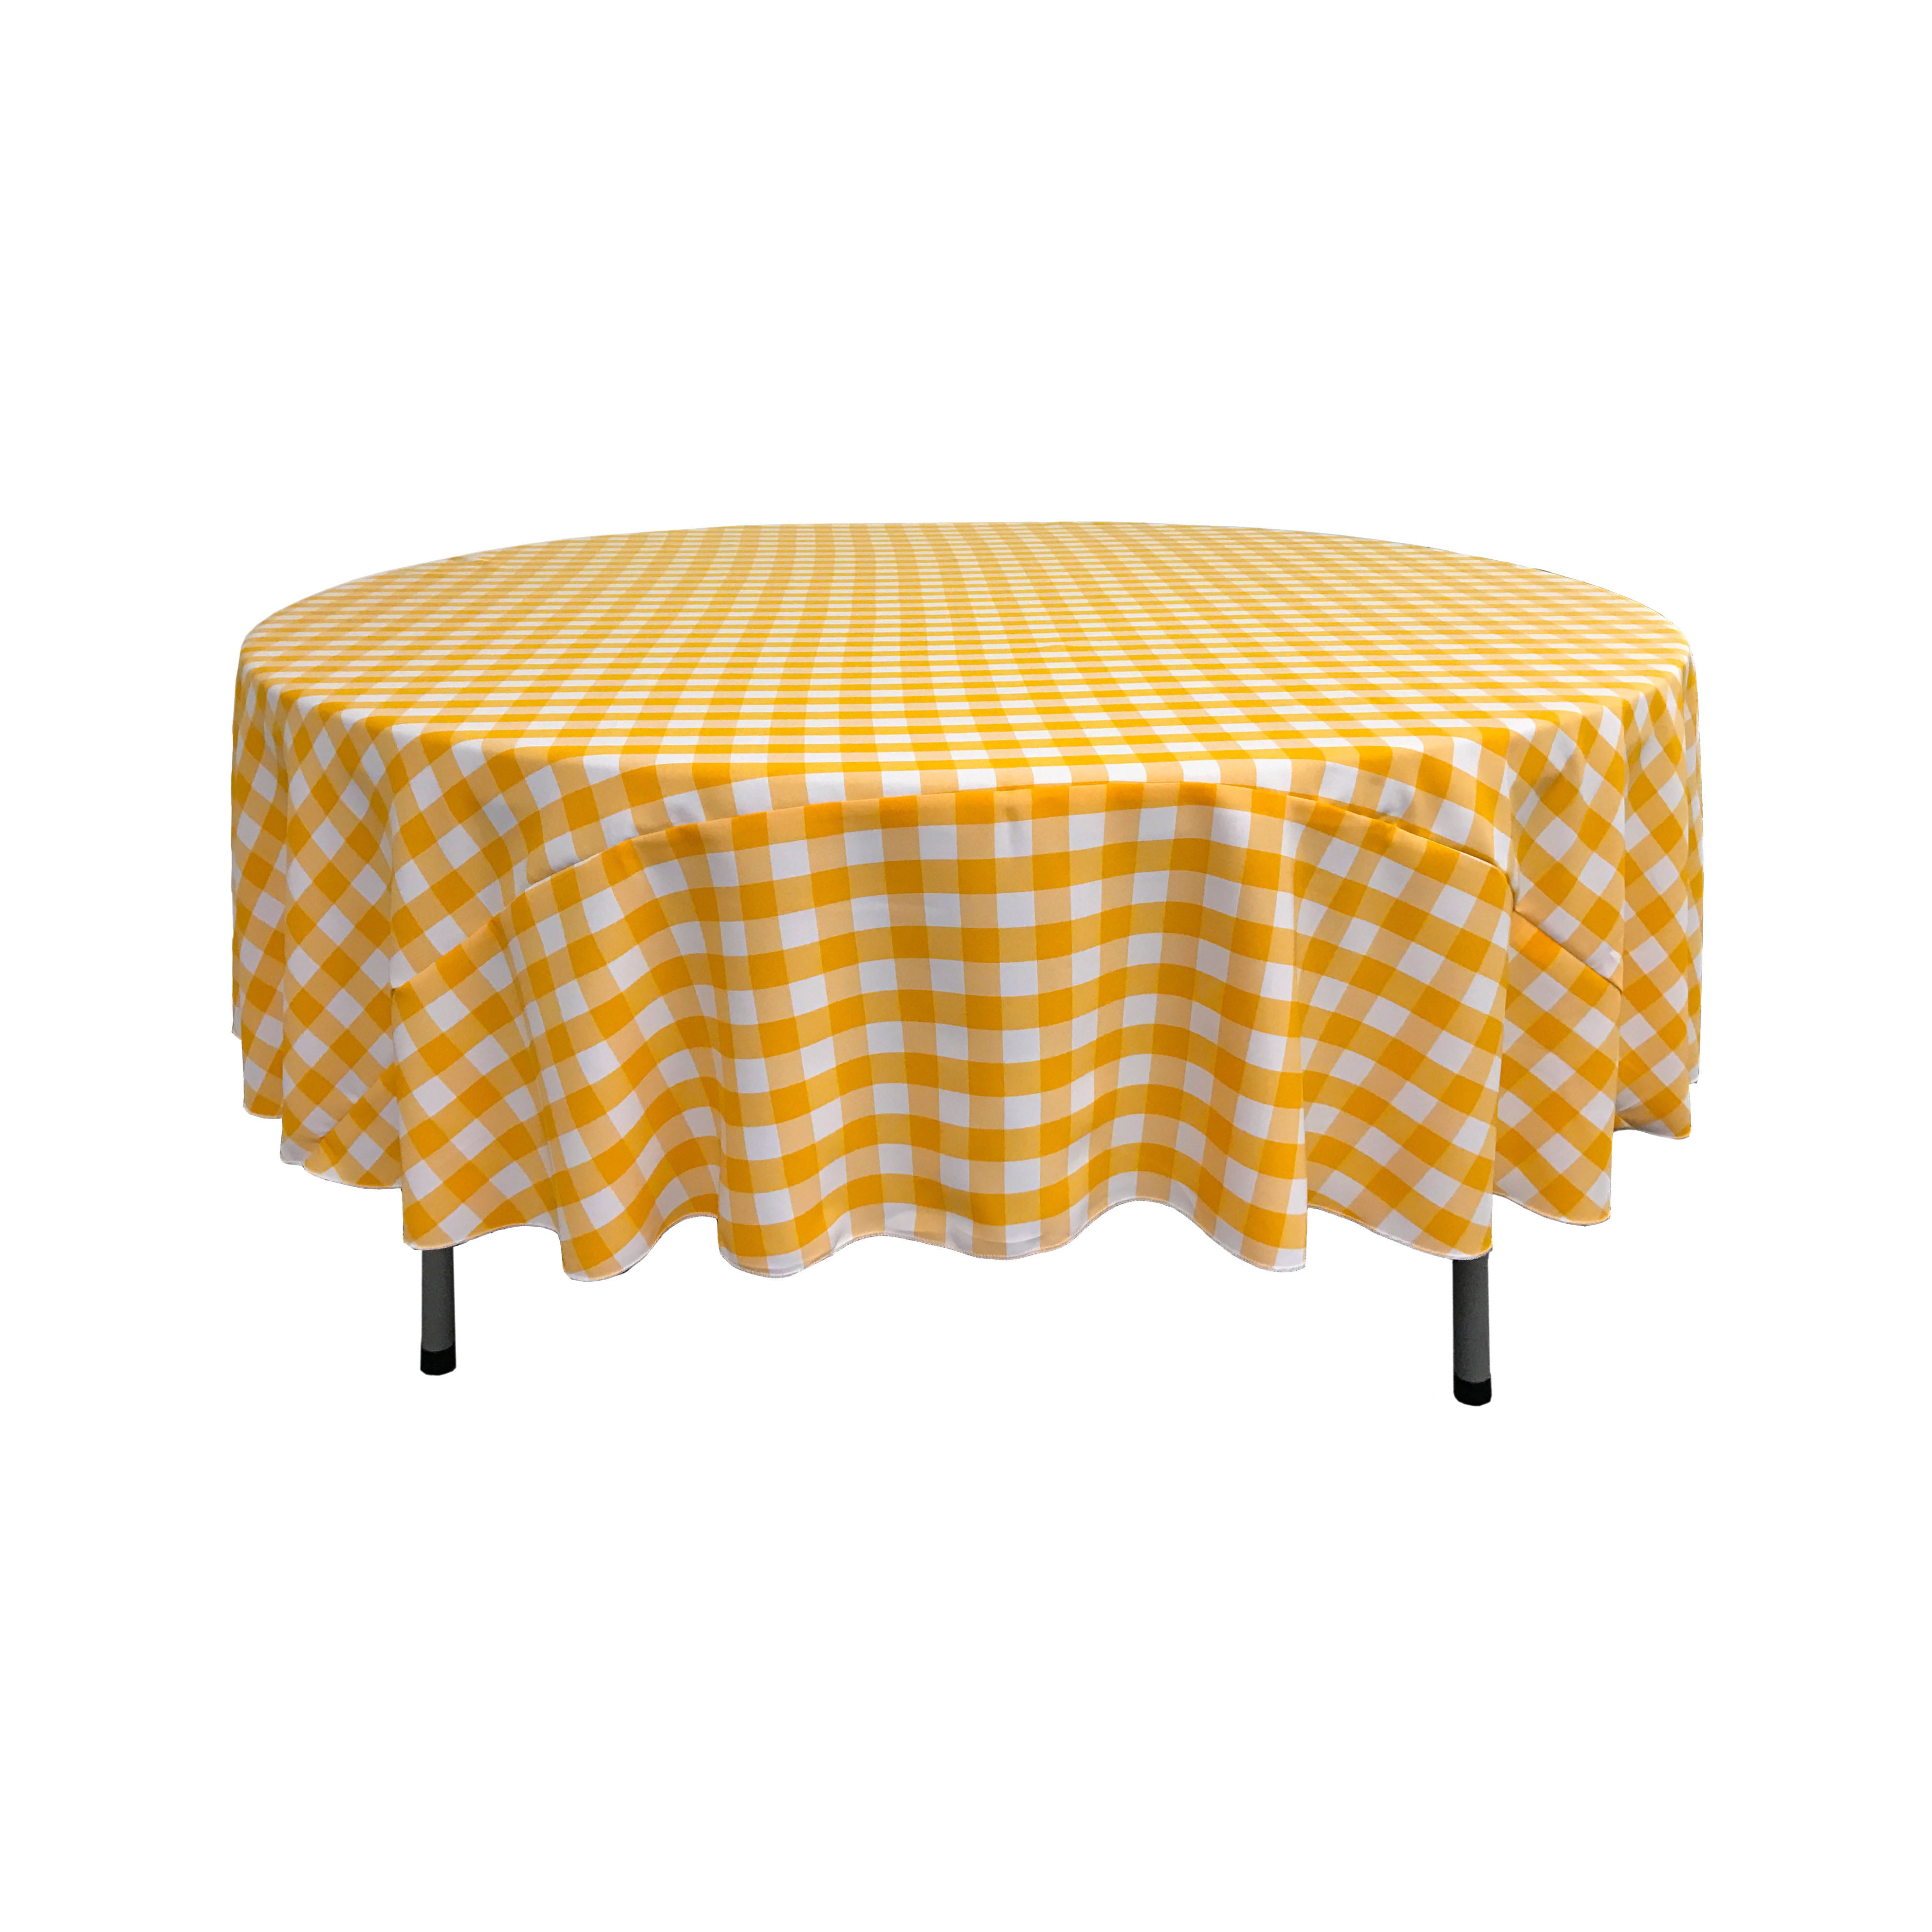 La Linen Polyester Gingham Checd 72, Linen For 72 Inch Round Table